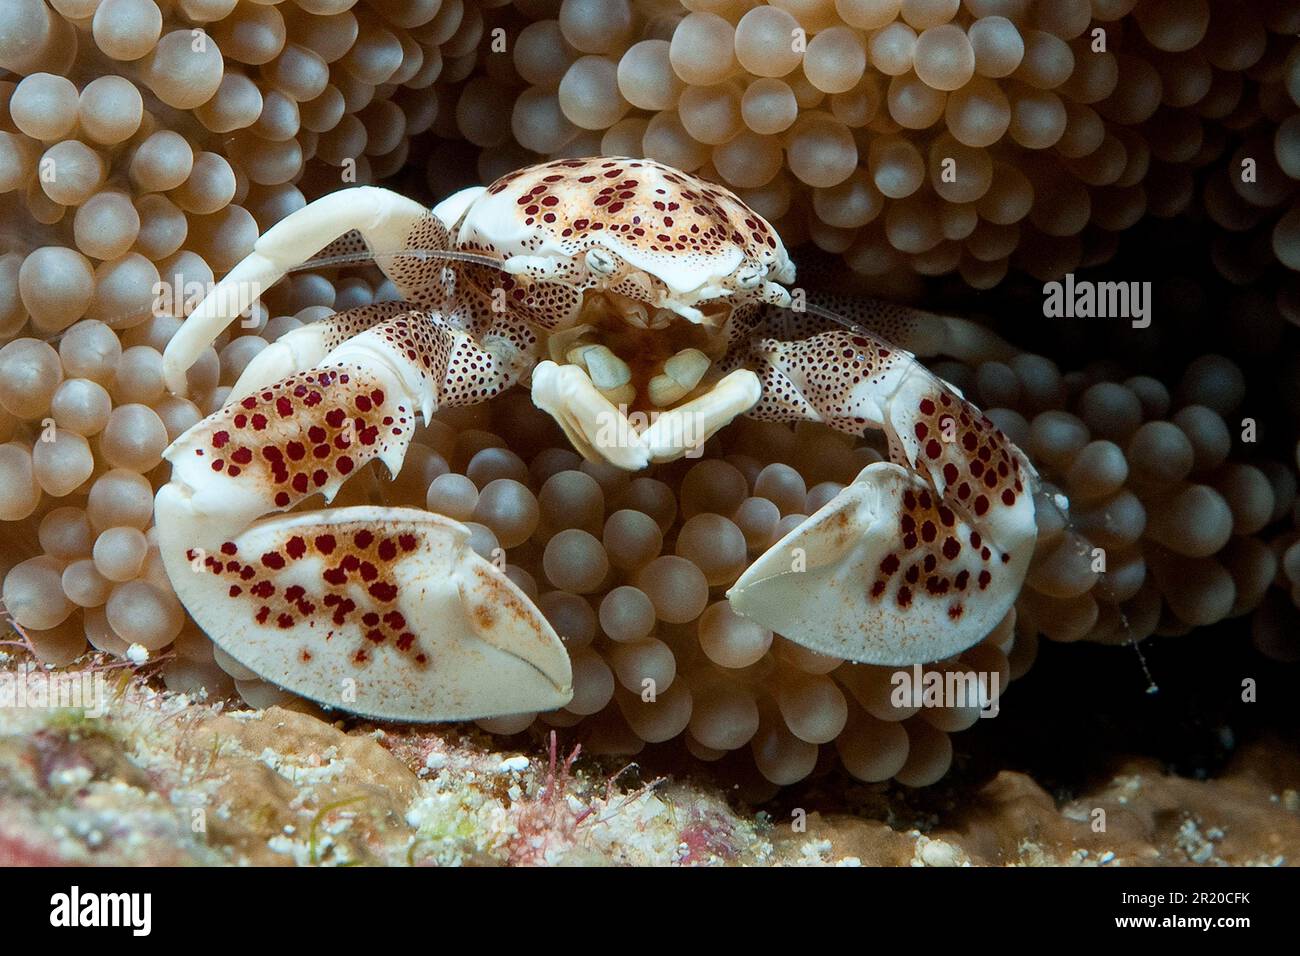 Spotted anemone crab, Indo-Pacific, spotted porcelain crab (Neopetrolisthes maculatus) Stock Photo